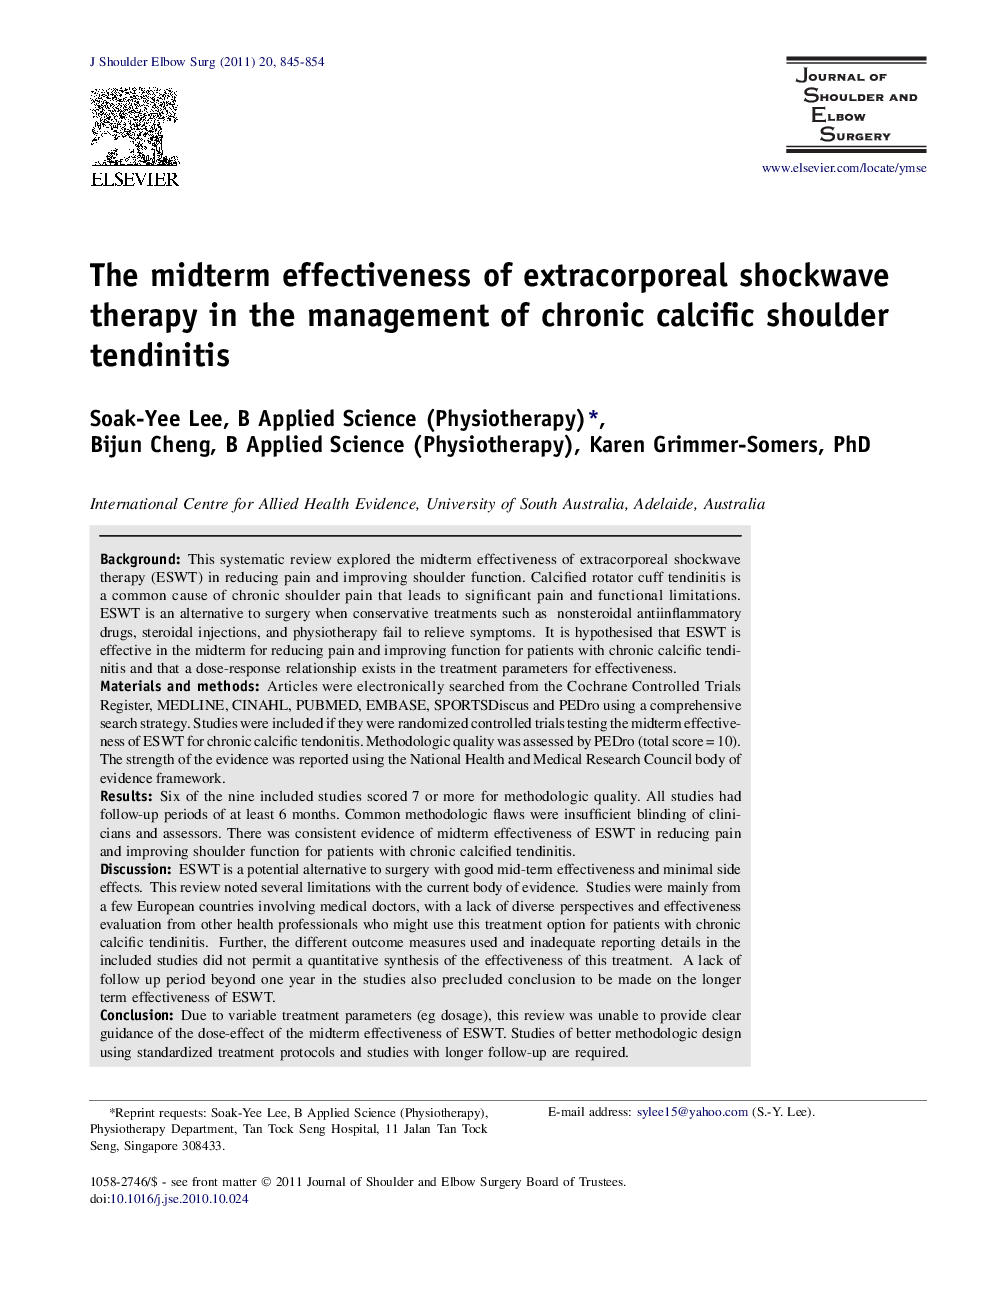 The midterm effectiveness of extracorporeal shockwave therapy in the management of chronic calcific shoulder tendinitis